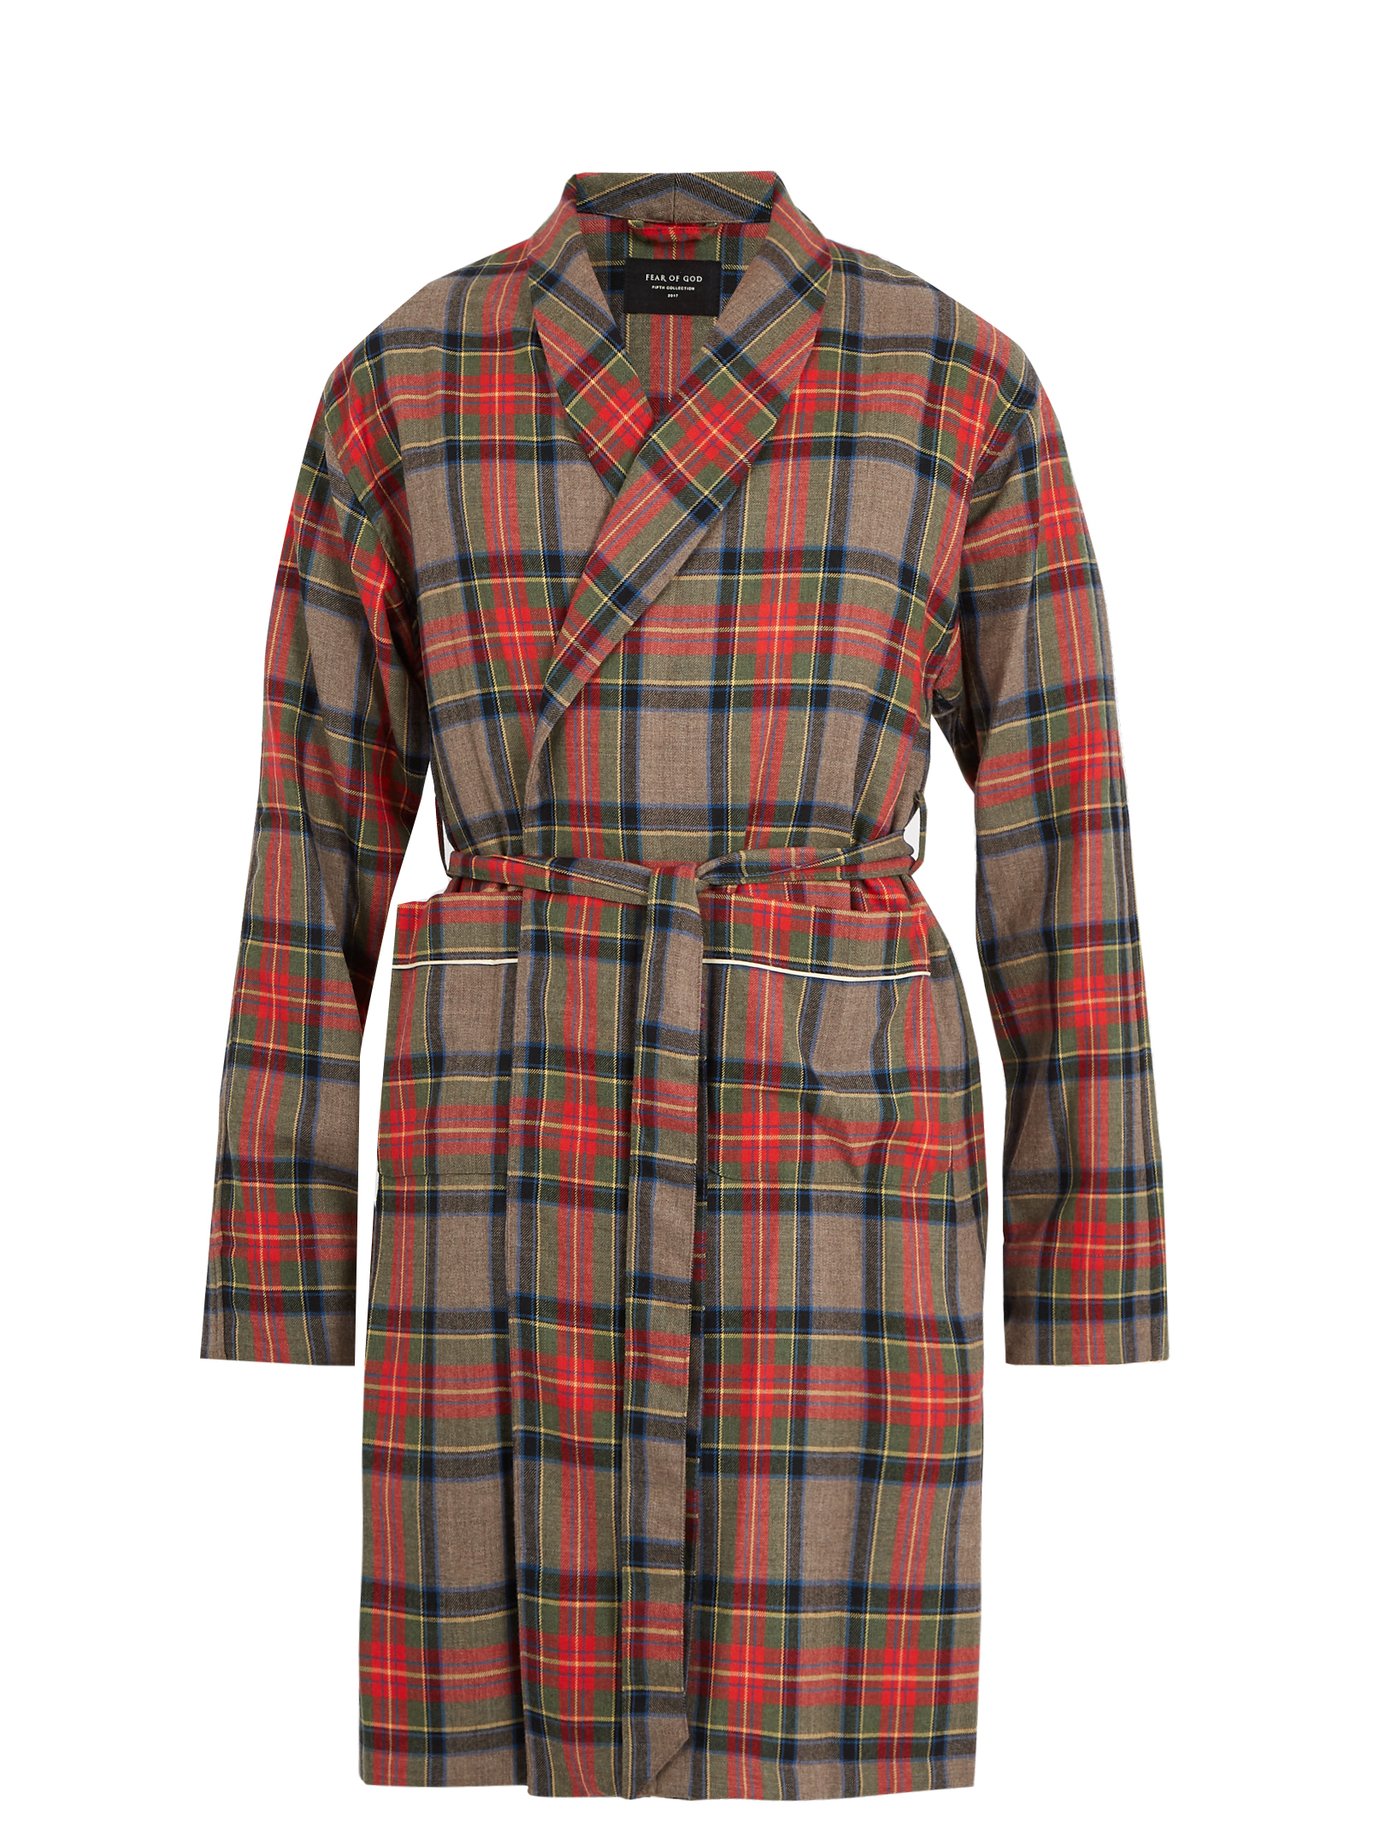 FEAR OF GOD Wool Robe In Checkered & Plaid, Neutrals, Red. in Brown,Tan ...